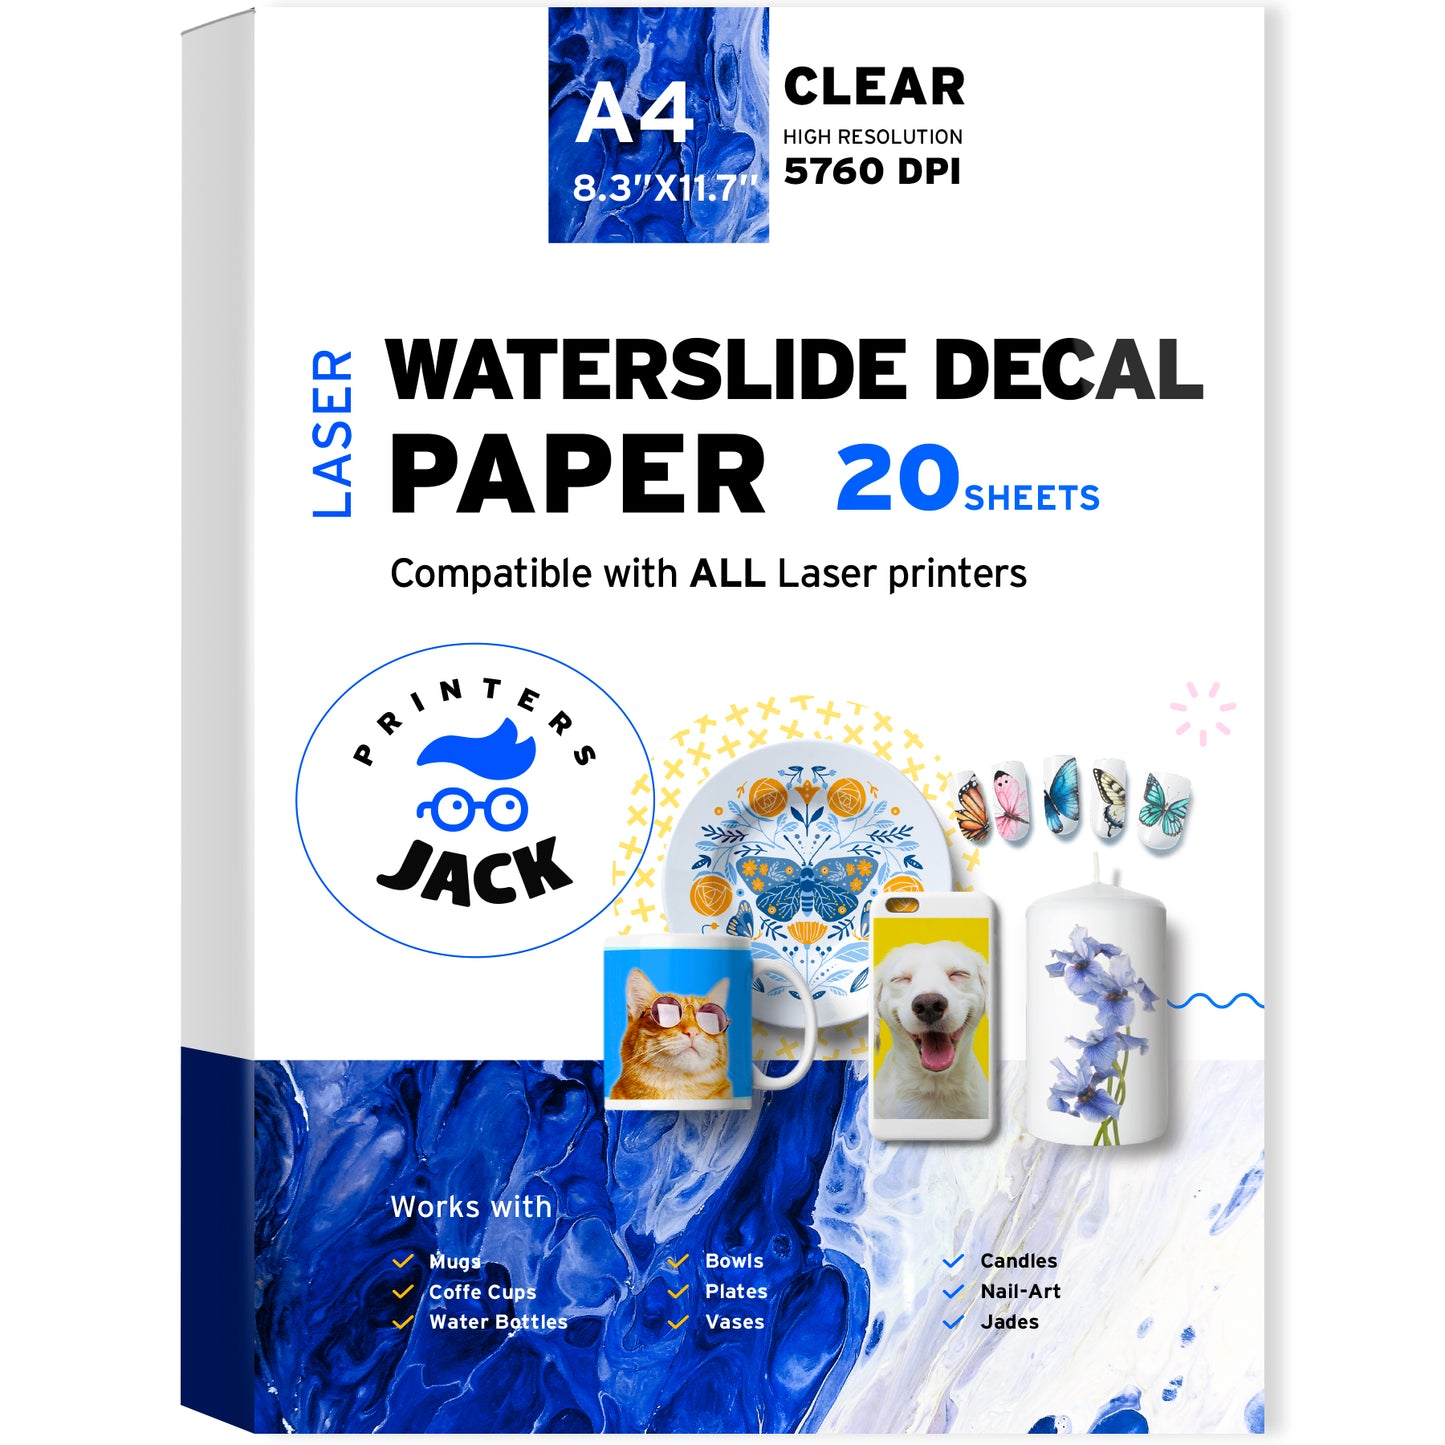 Clear Waterslide Decal Paper A4 (8.3" x 11.7")